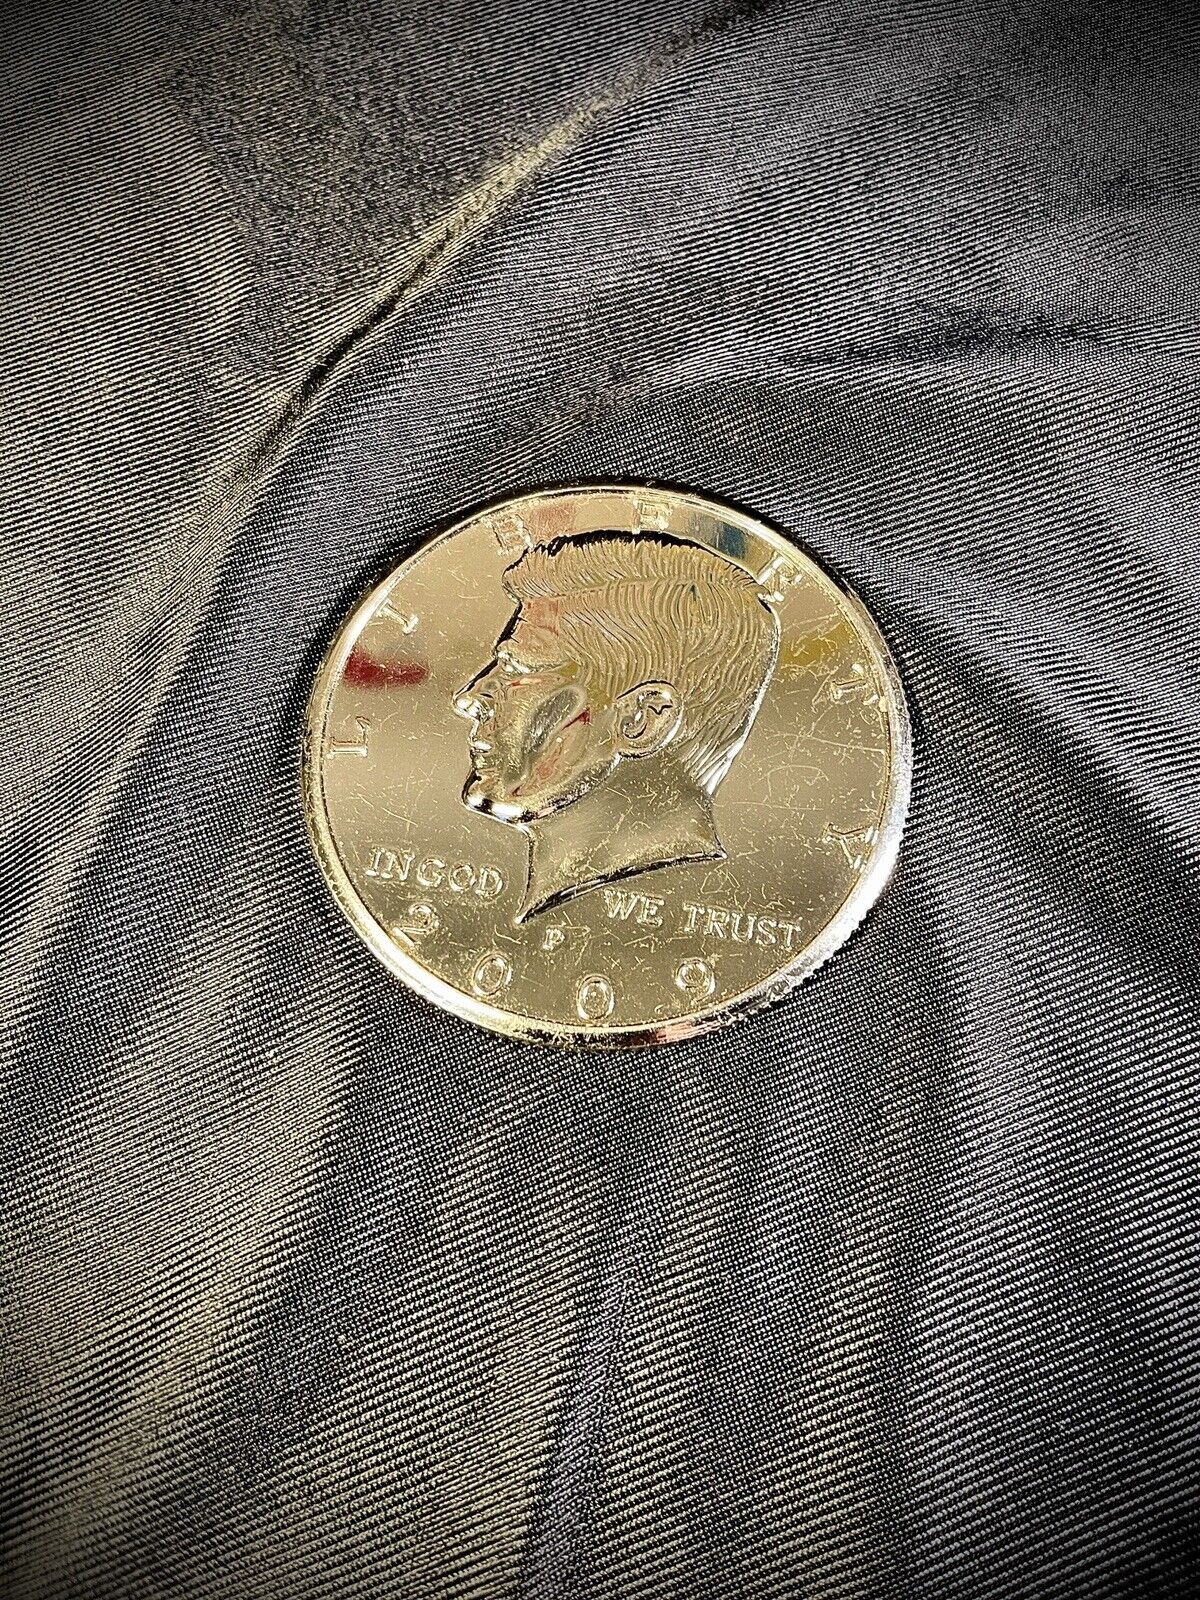 Giant 50 Cent Coin Used In Magic Tricks, Used